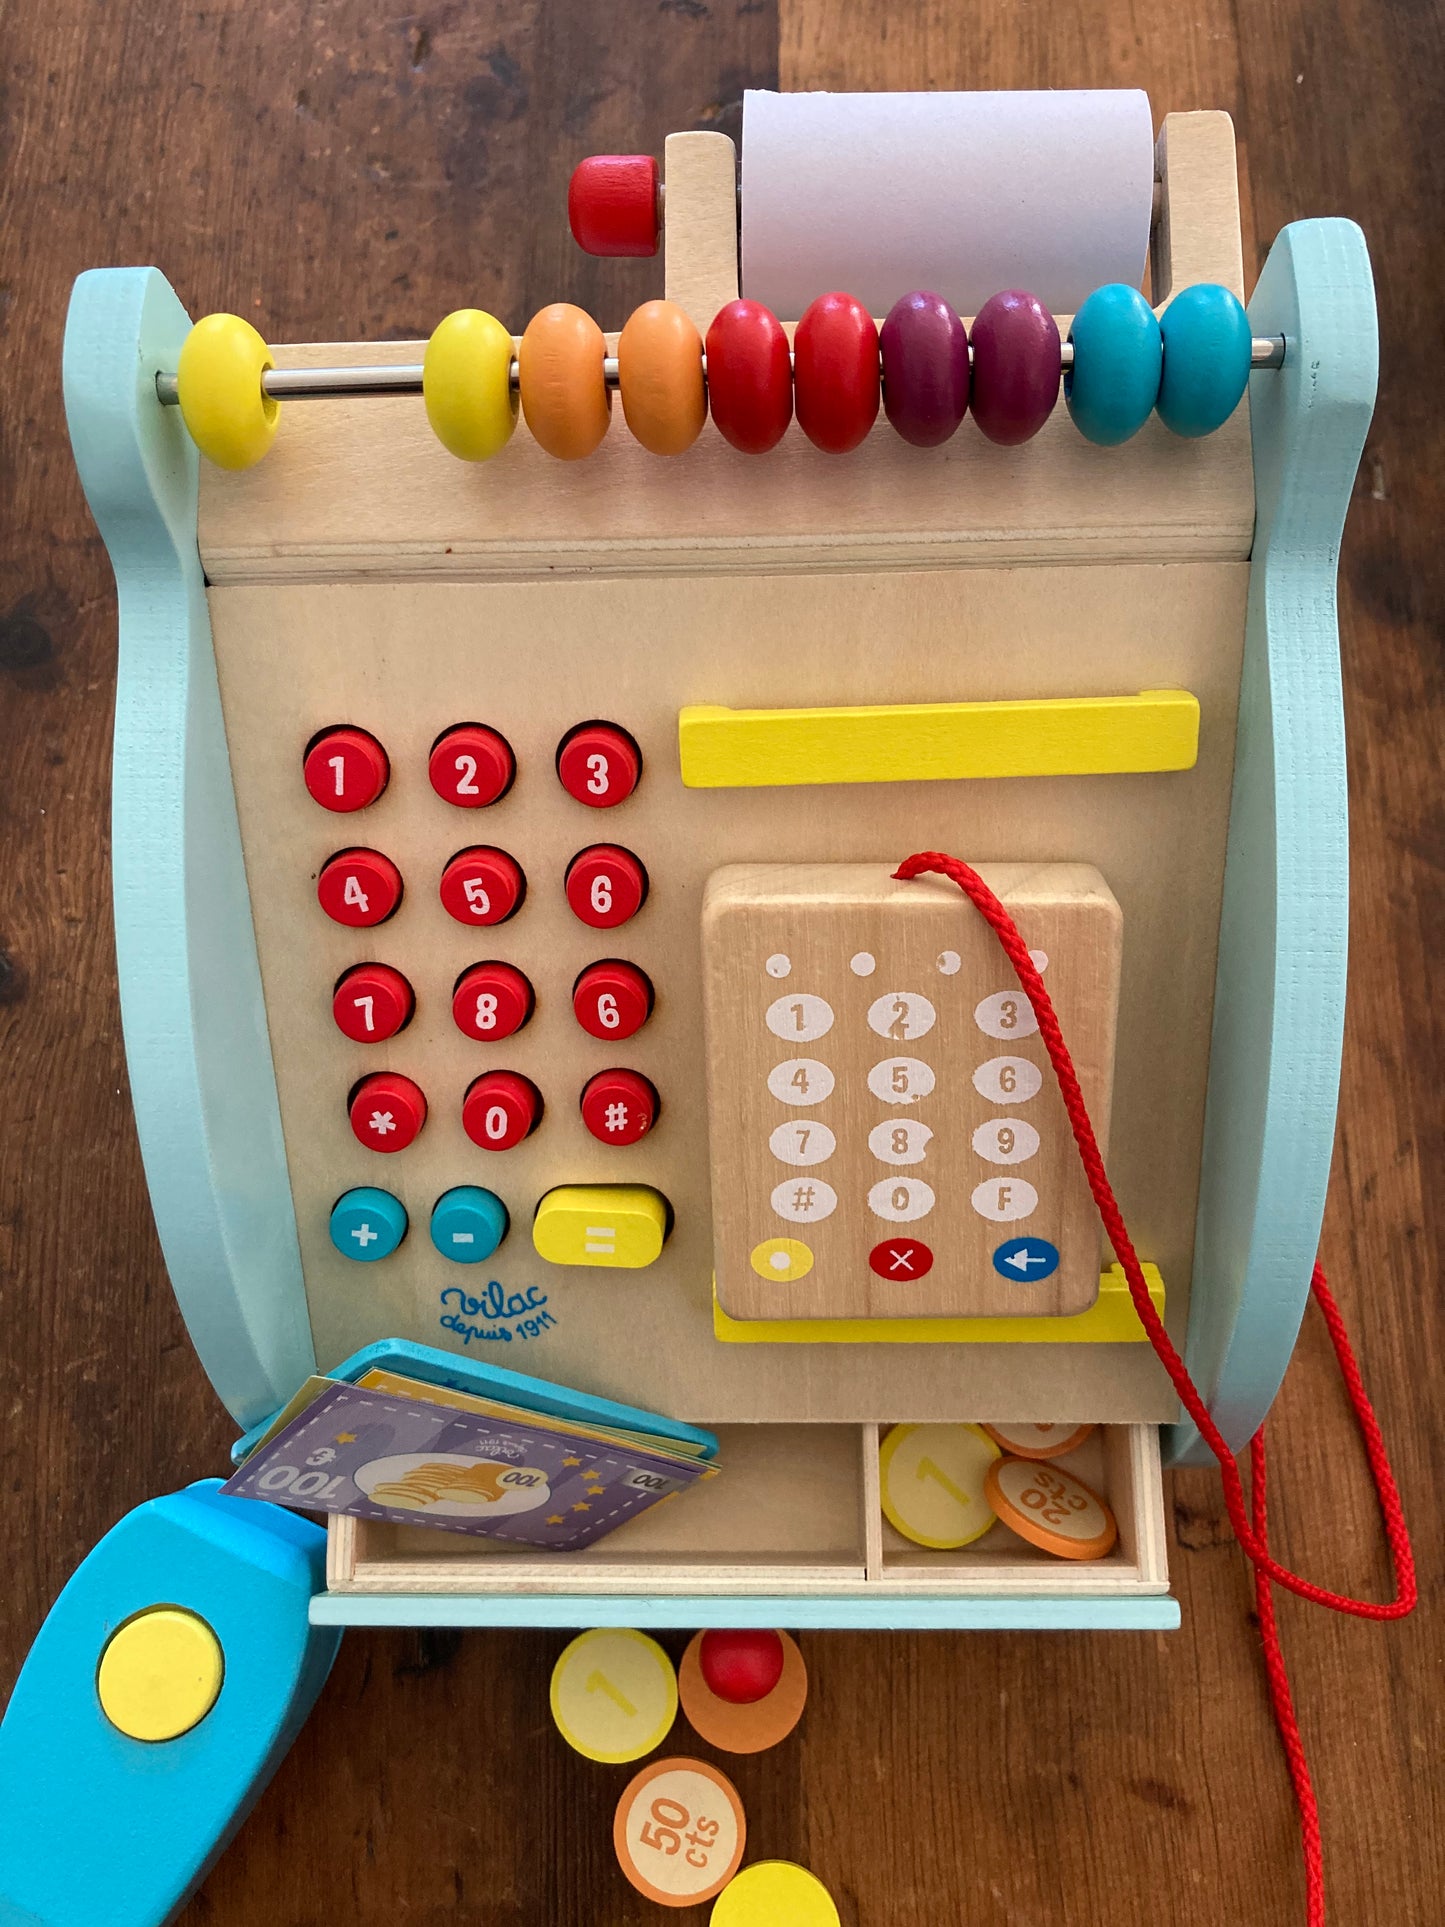 Keeping House Play - Wooden Toy CASH REGISTER